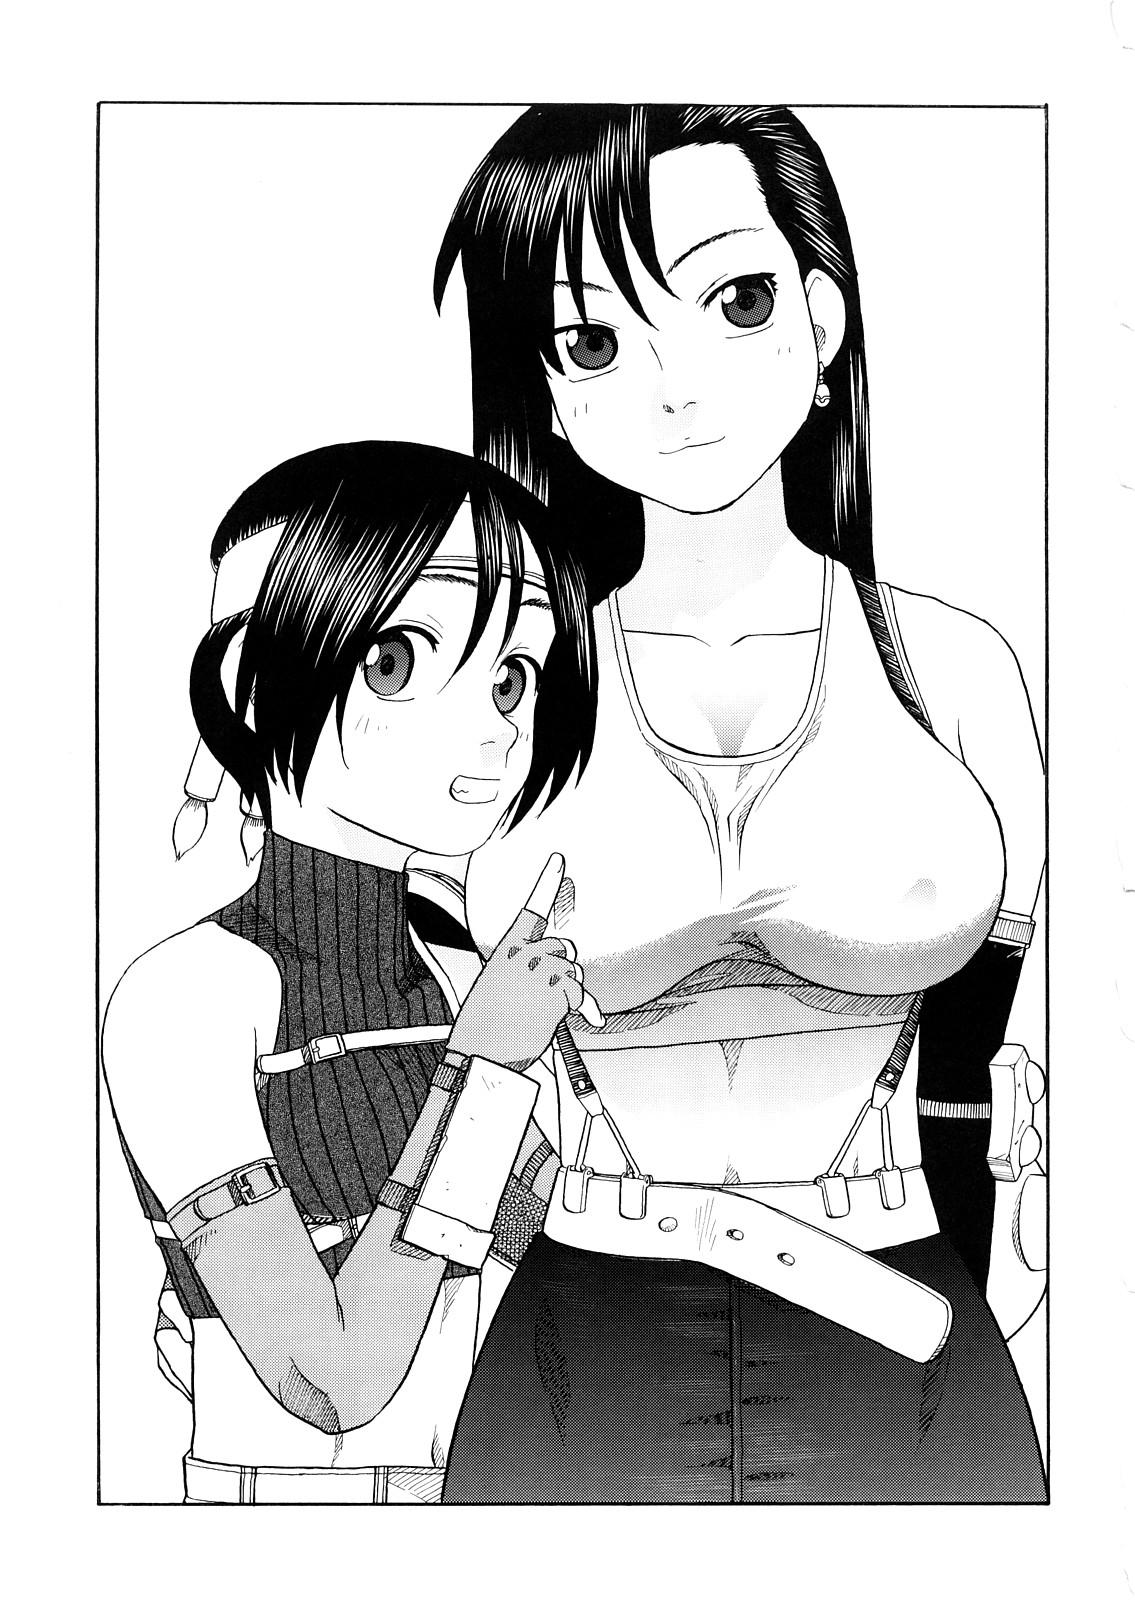 Free Blowjob Porn Tifa to Yuffie to Yojouhan - Final fantasy vii Asstomouth - Page 2